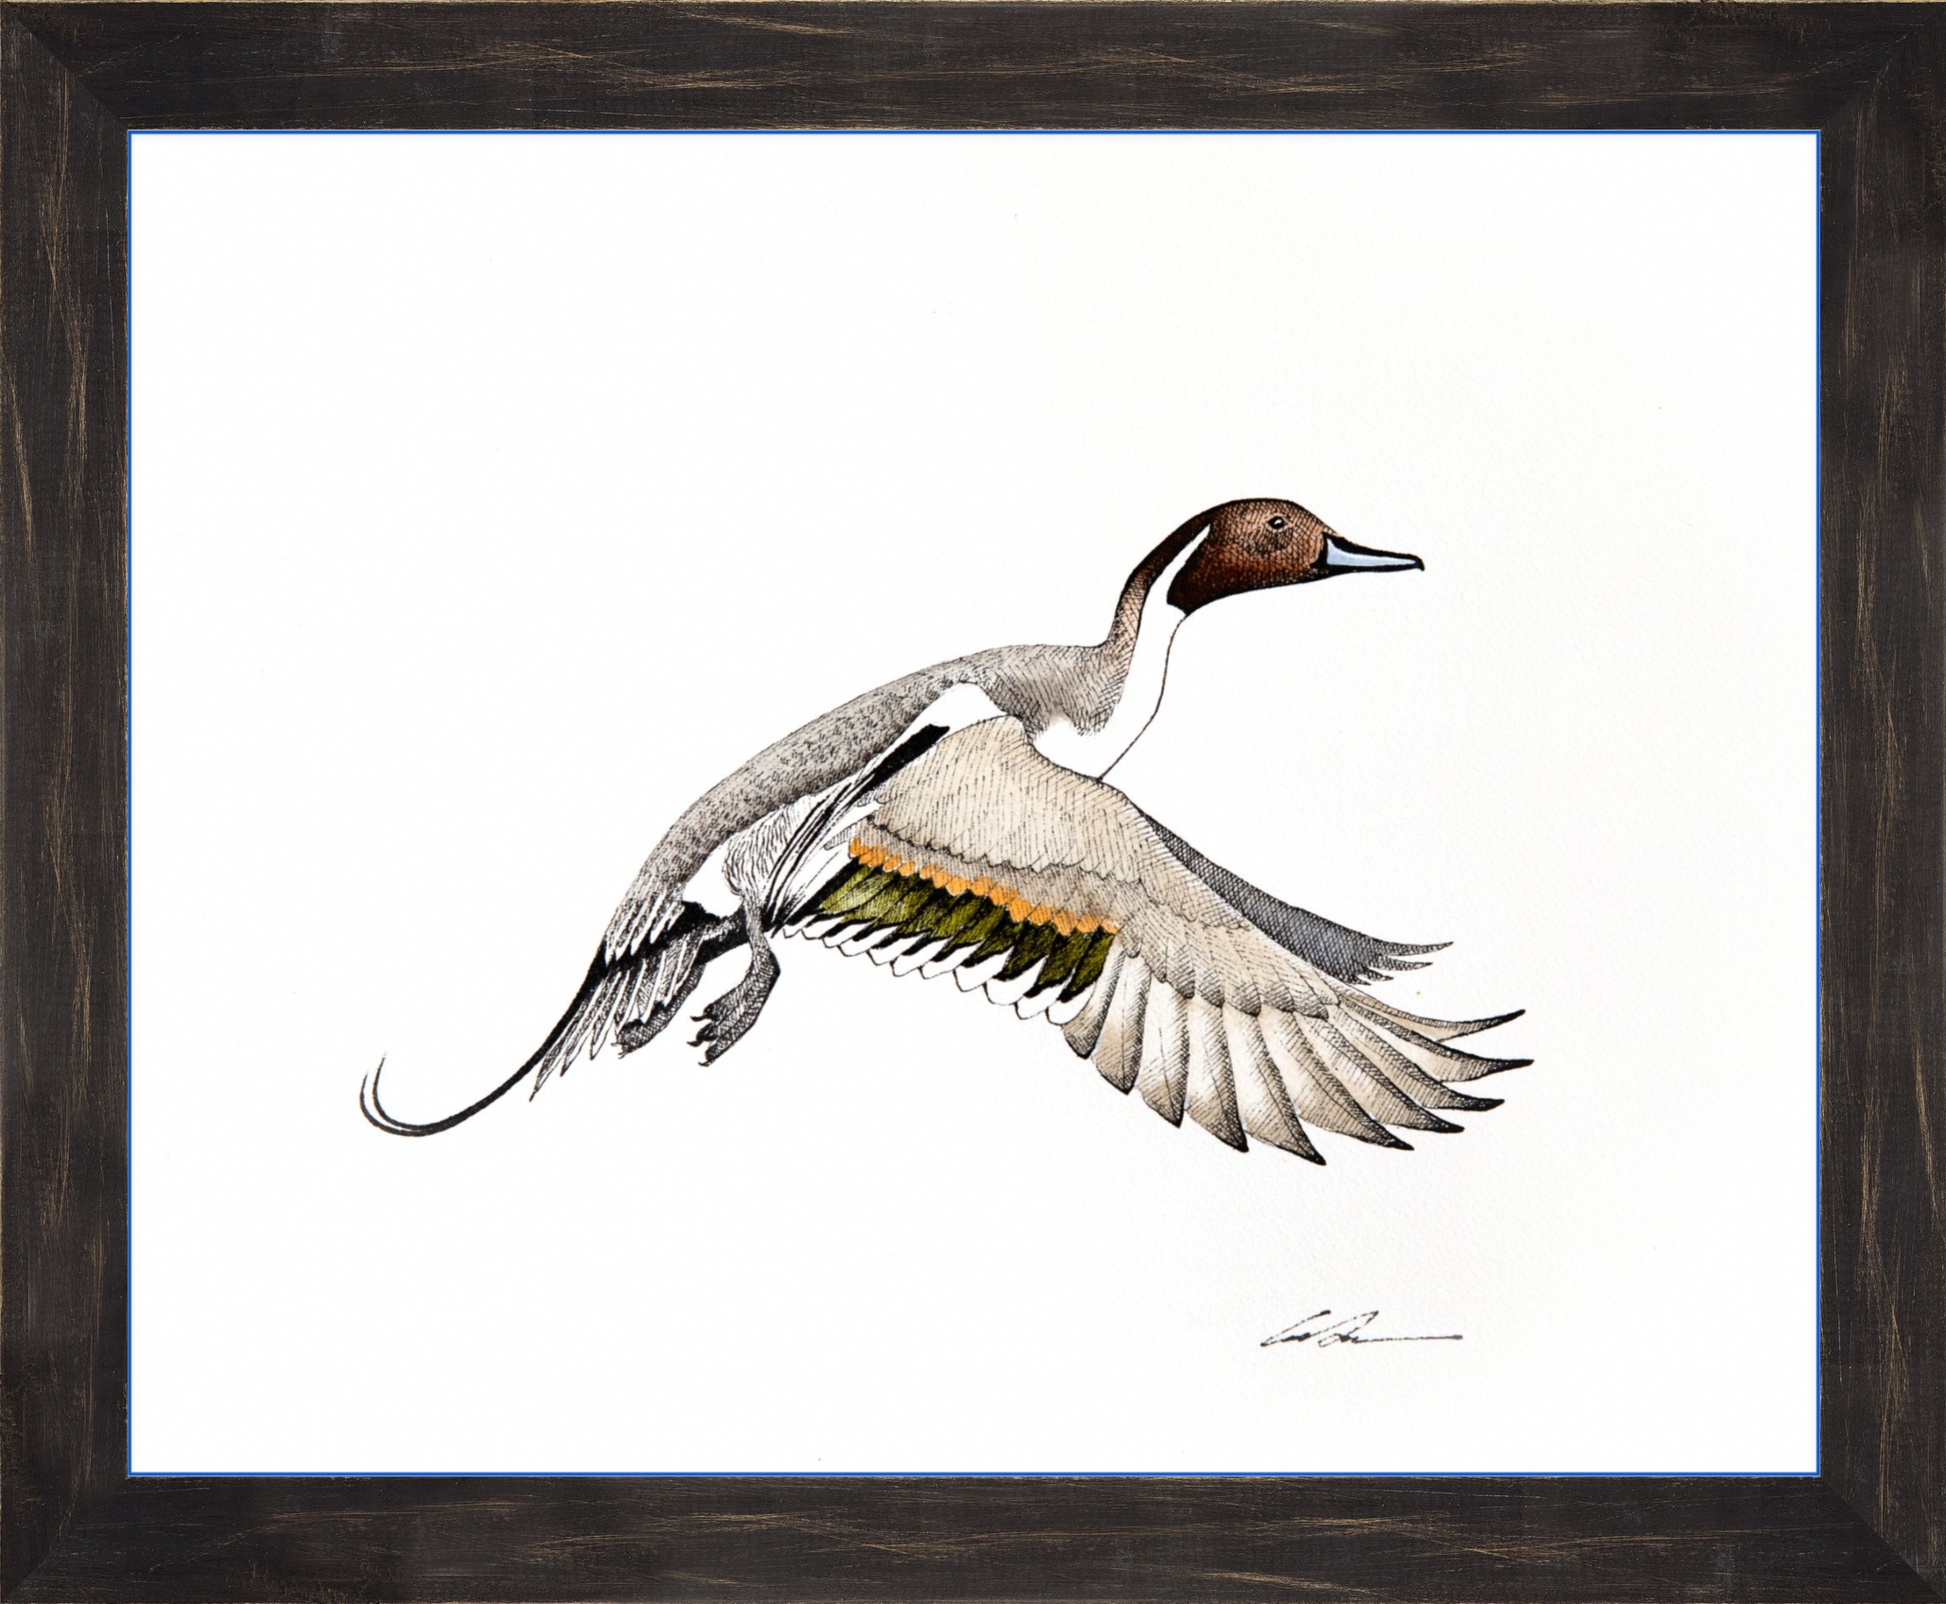 Watercolor over pen and ink of flying Pintail Duck, framed in black rustic frame